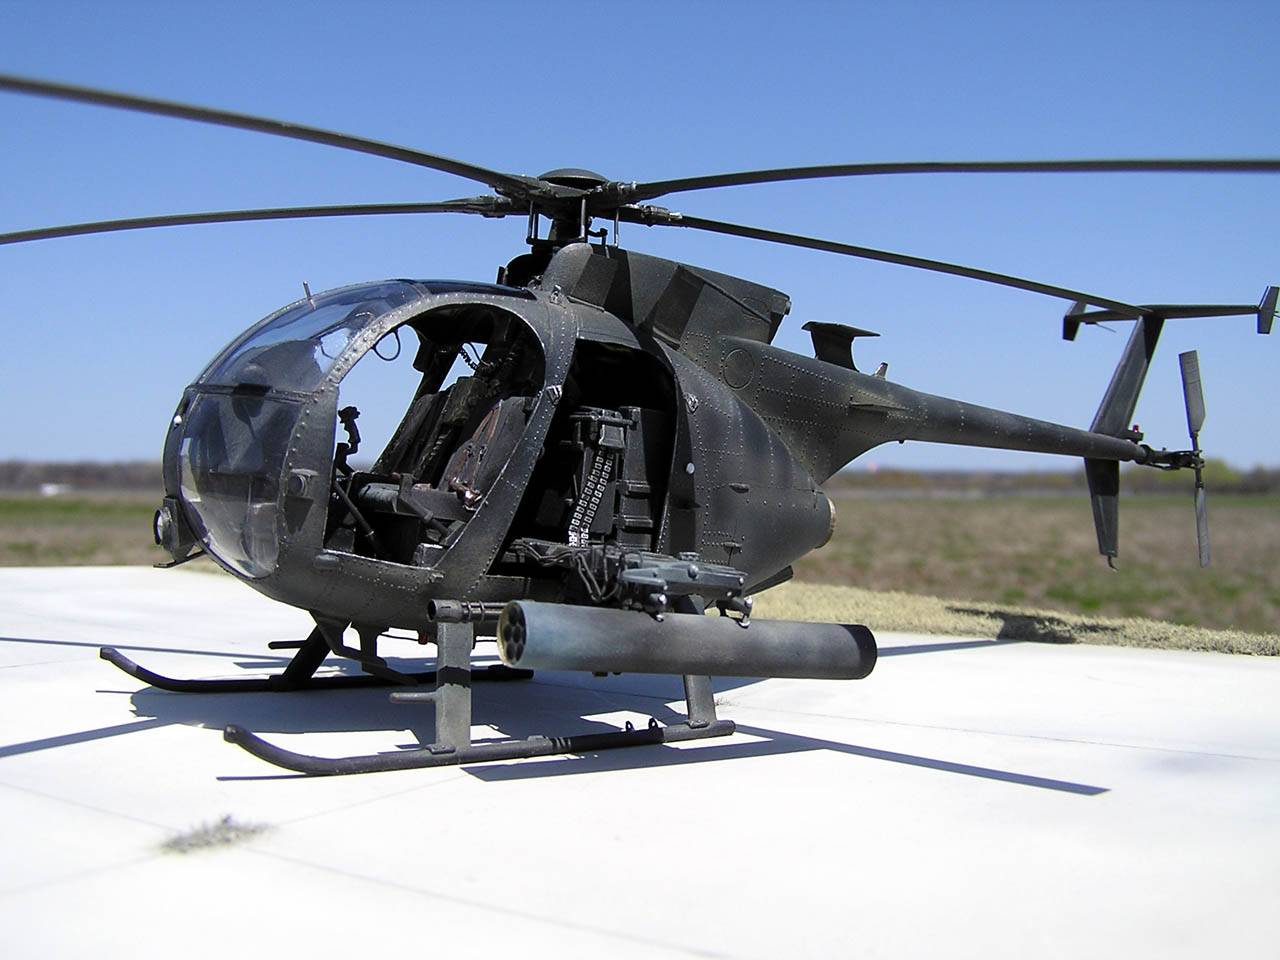 Md helicopters mh 6 little bird - alchetron, the free social encyclopedia